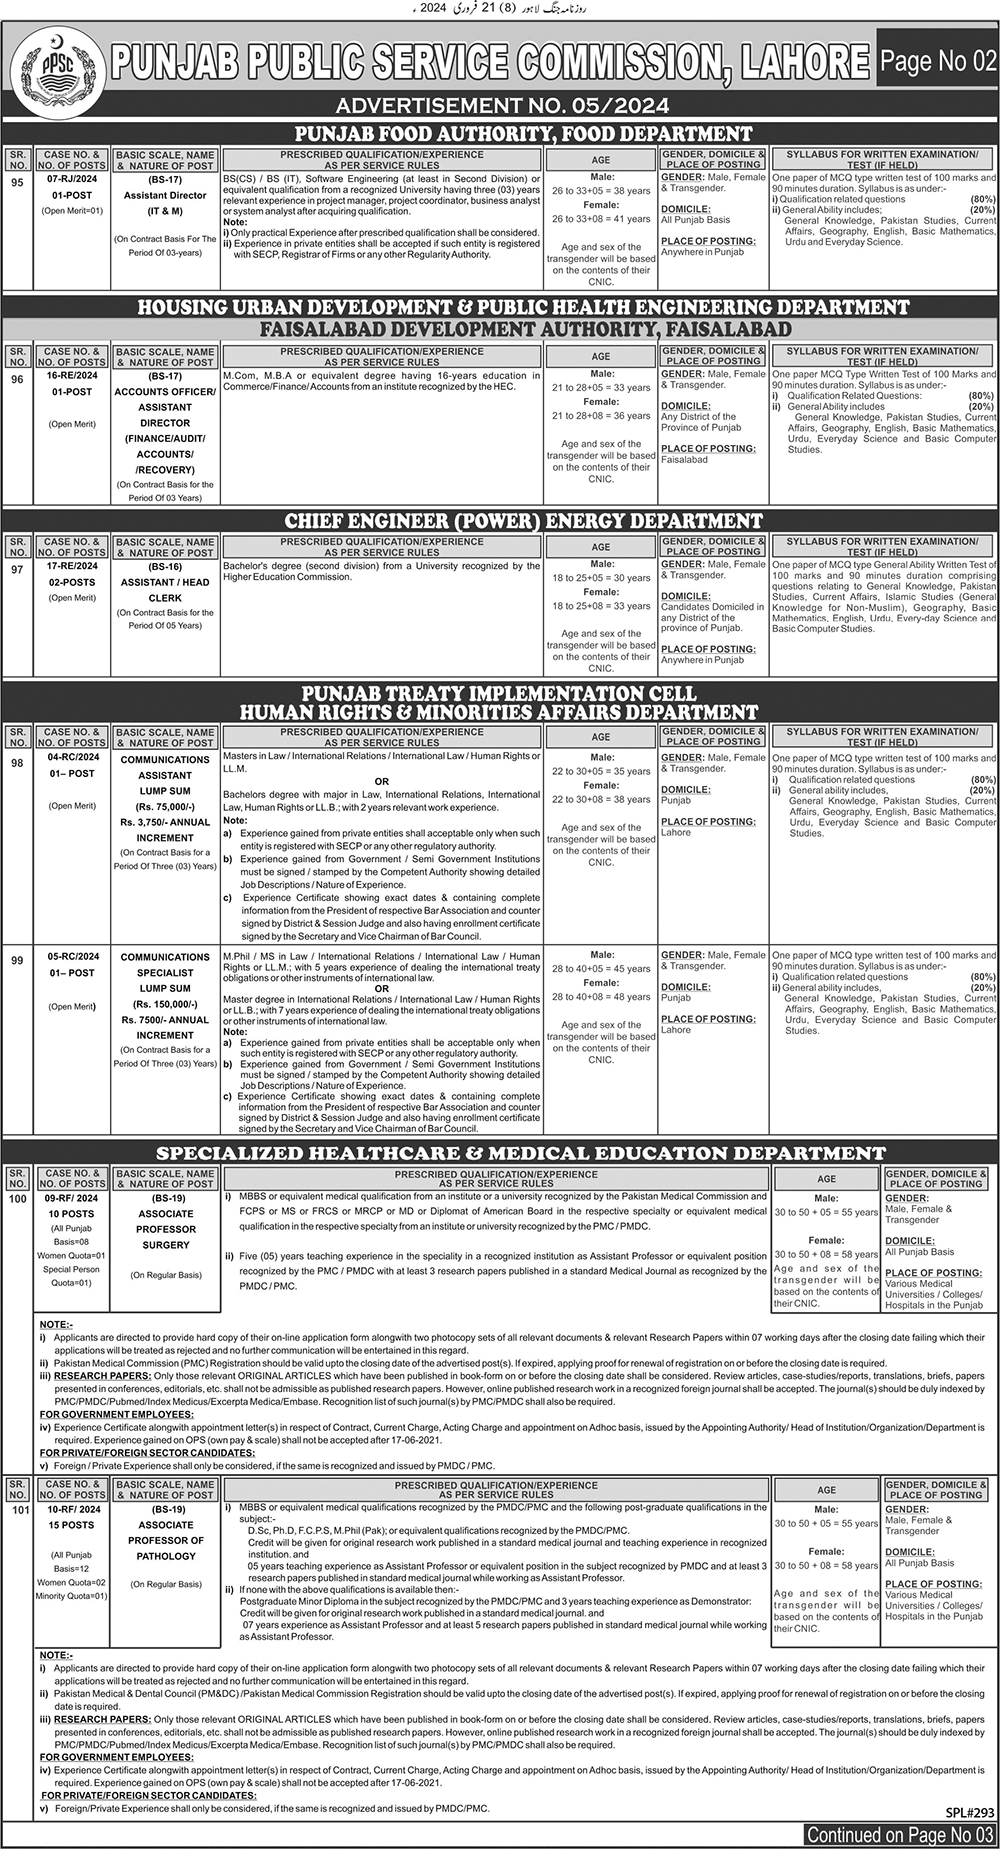 The Latest and New PPSC Vacancies Ad No. 05 2024